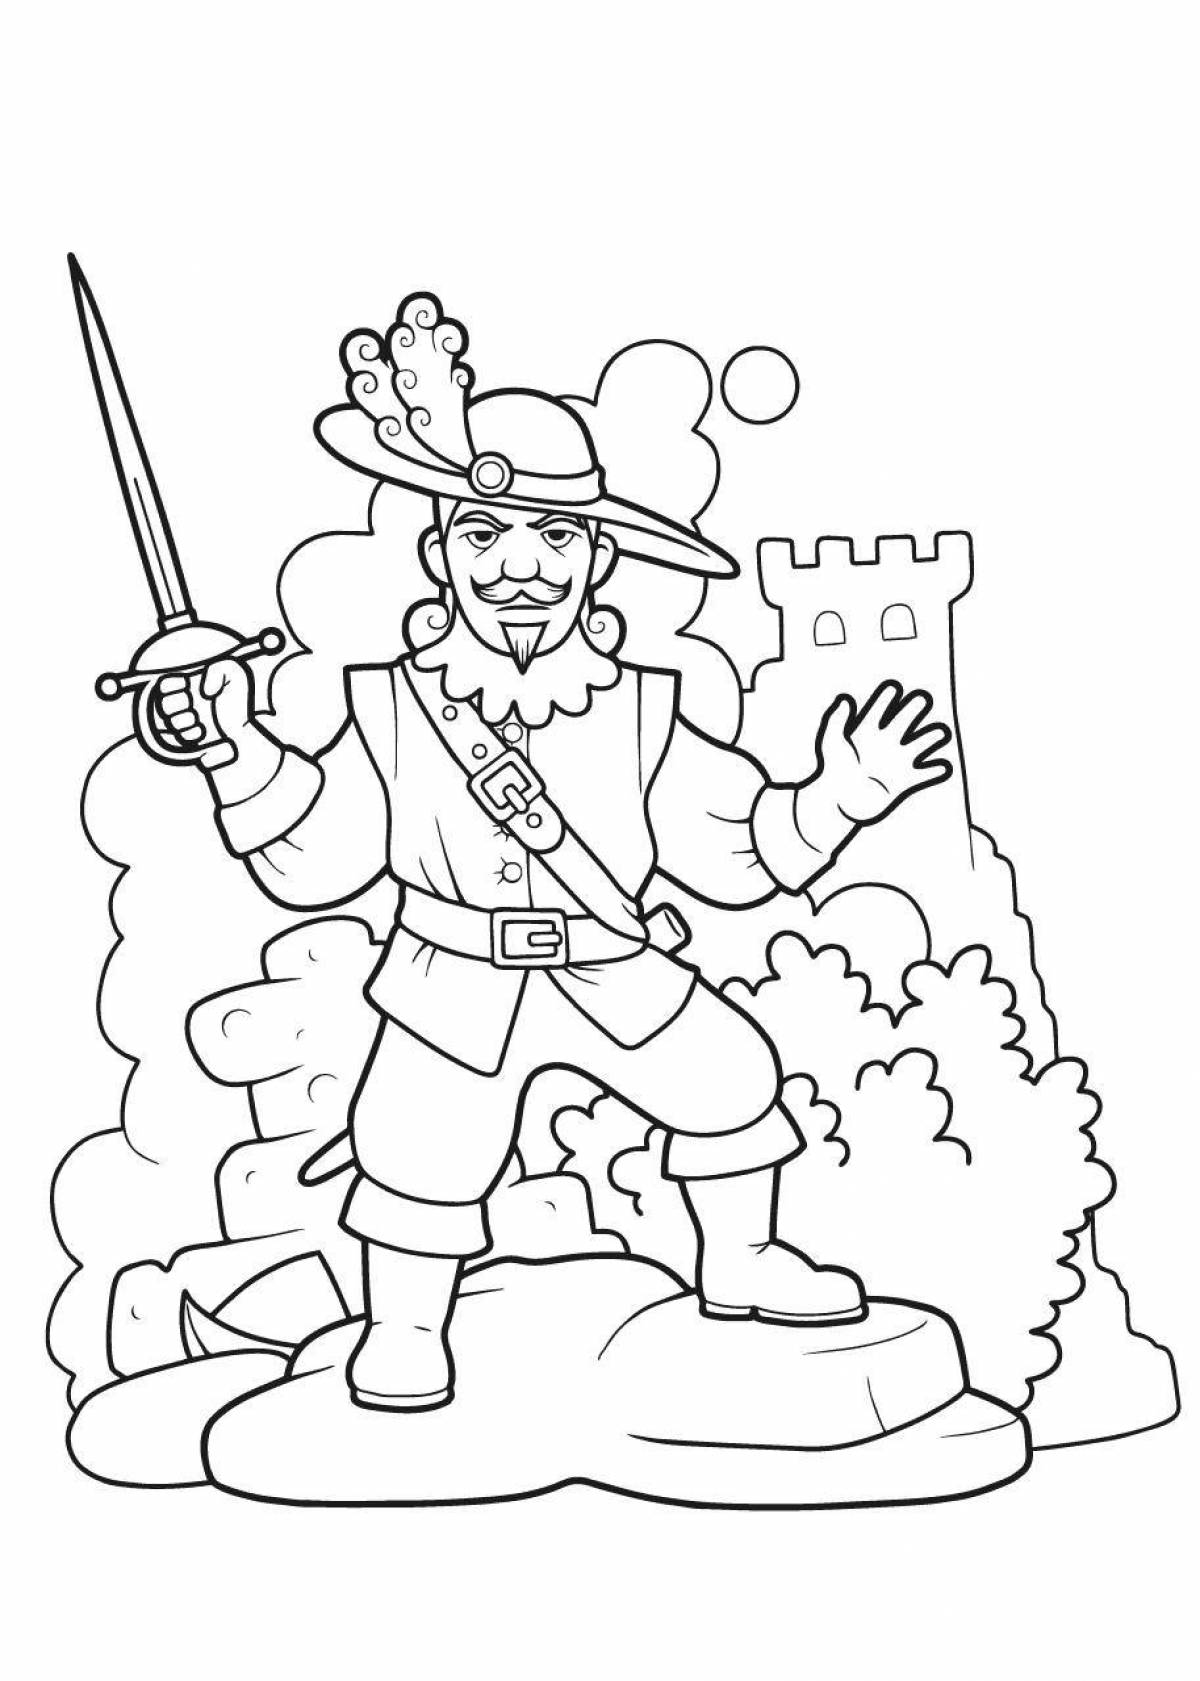 Exciting musketeer coloring pages